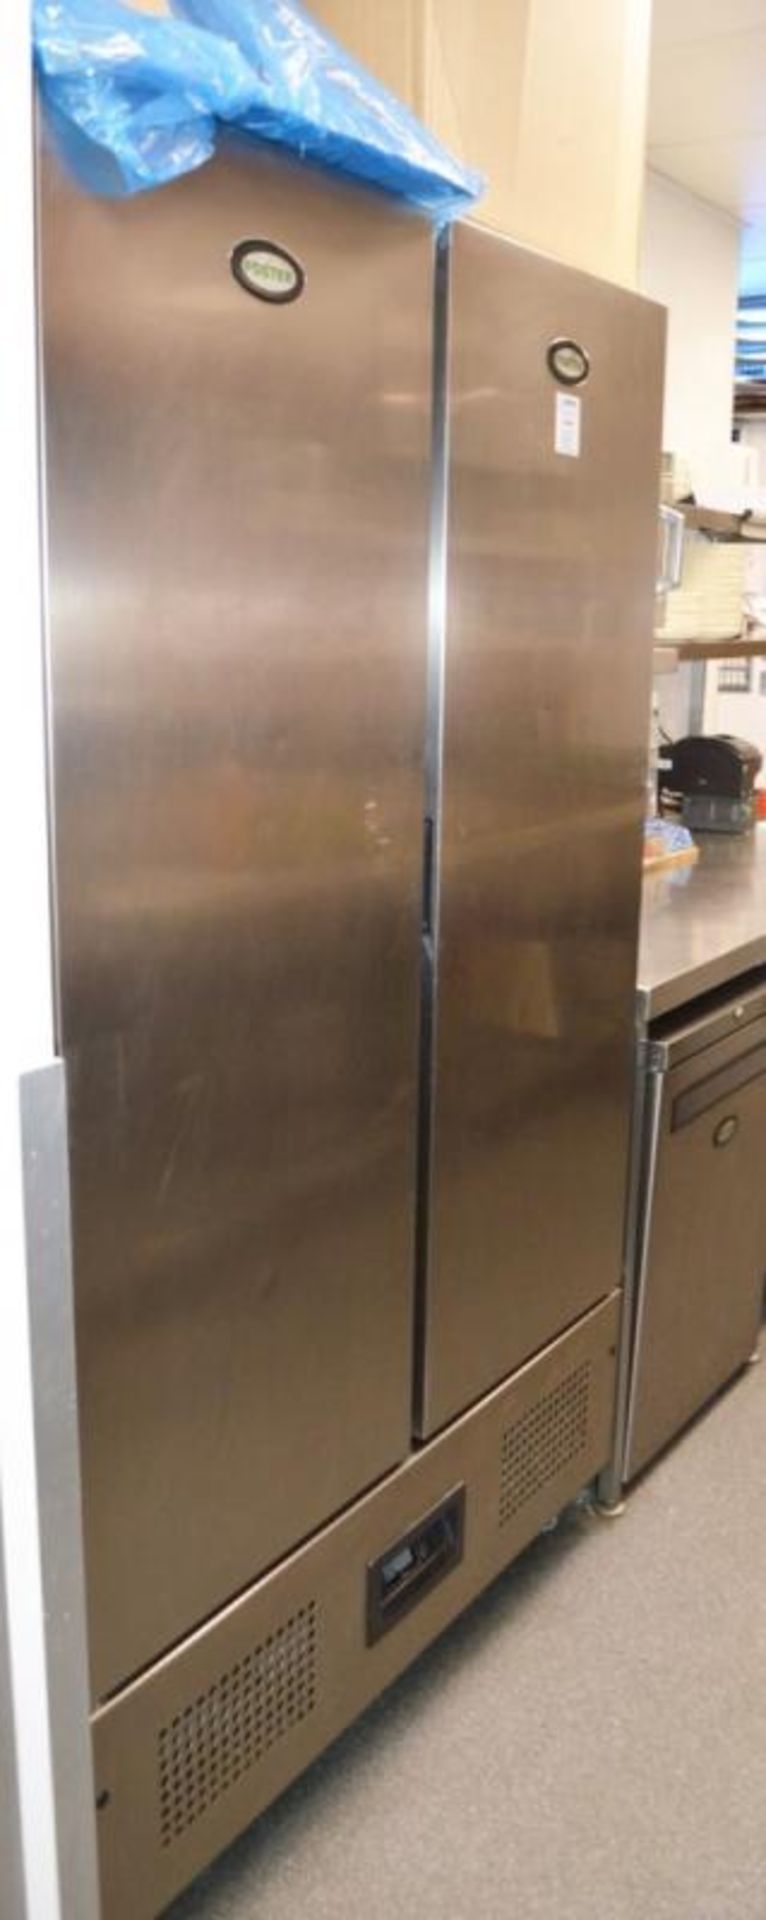 1 x Foster 800 Litre Double Door Meat Fridge With Stainless Steel Finish - Model FSL800M - Ref NC360 - Image 3 of 4